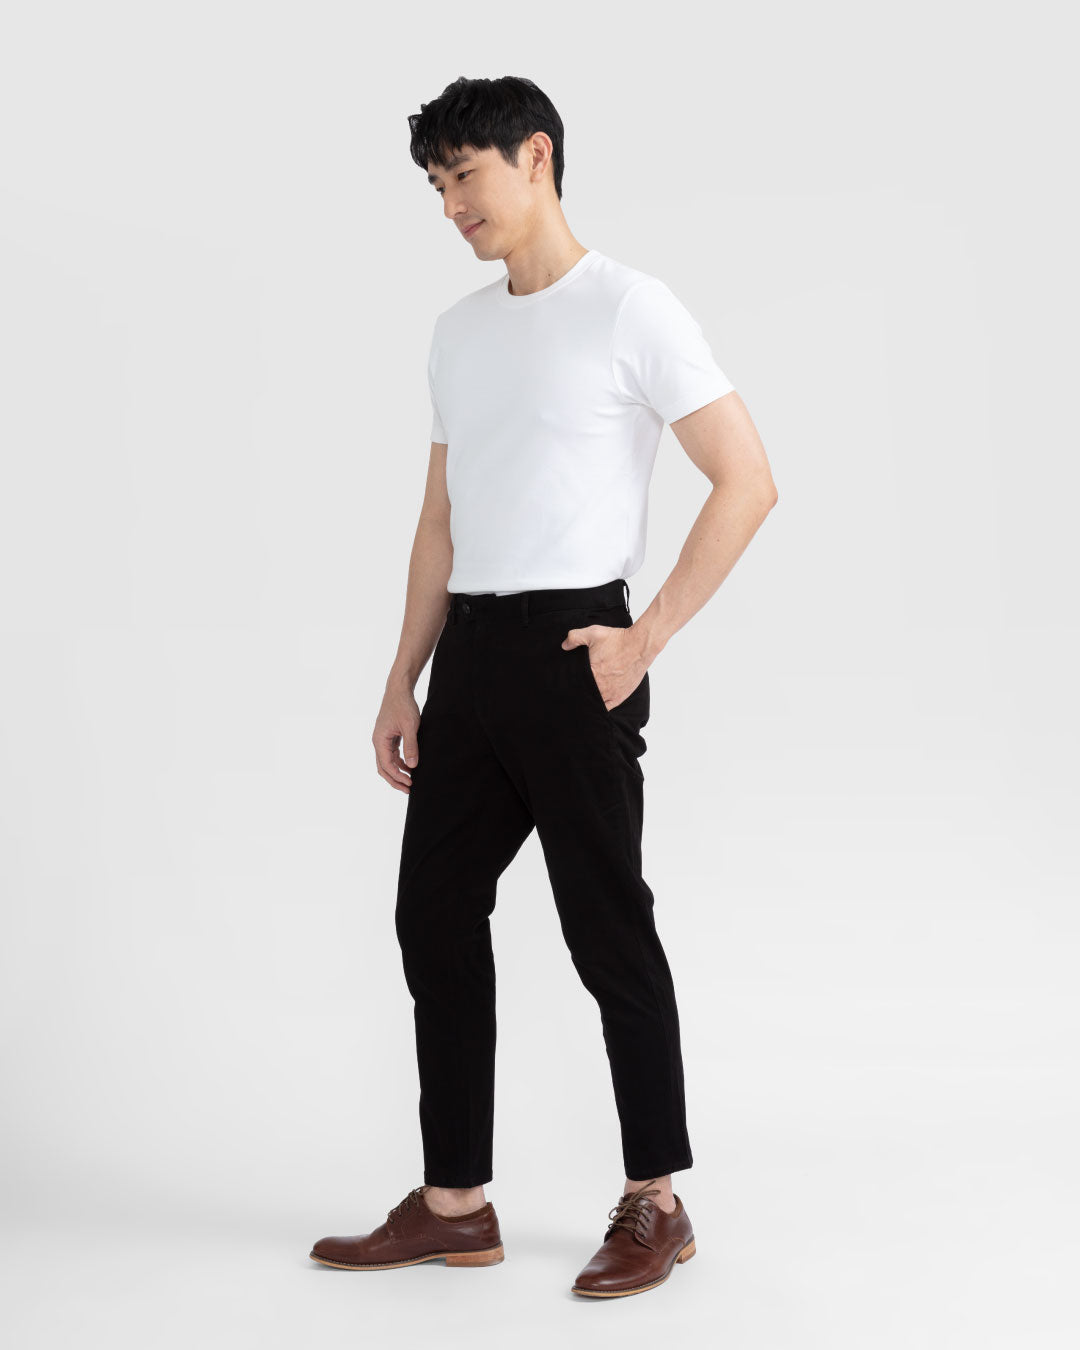 Buy black chinos for men stretchable trousers for men  slim fit pants for  men  chinos pants for mens  cotton chinos for men  black chinos for men  slim fit 